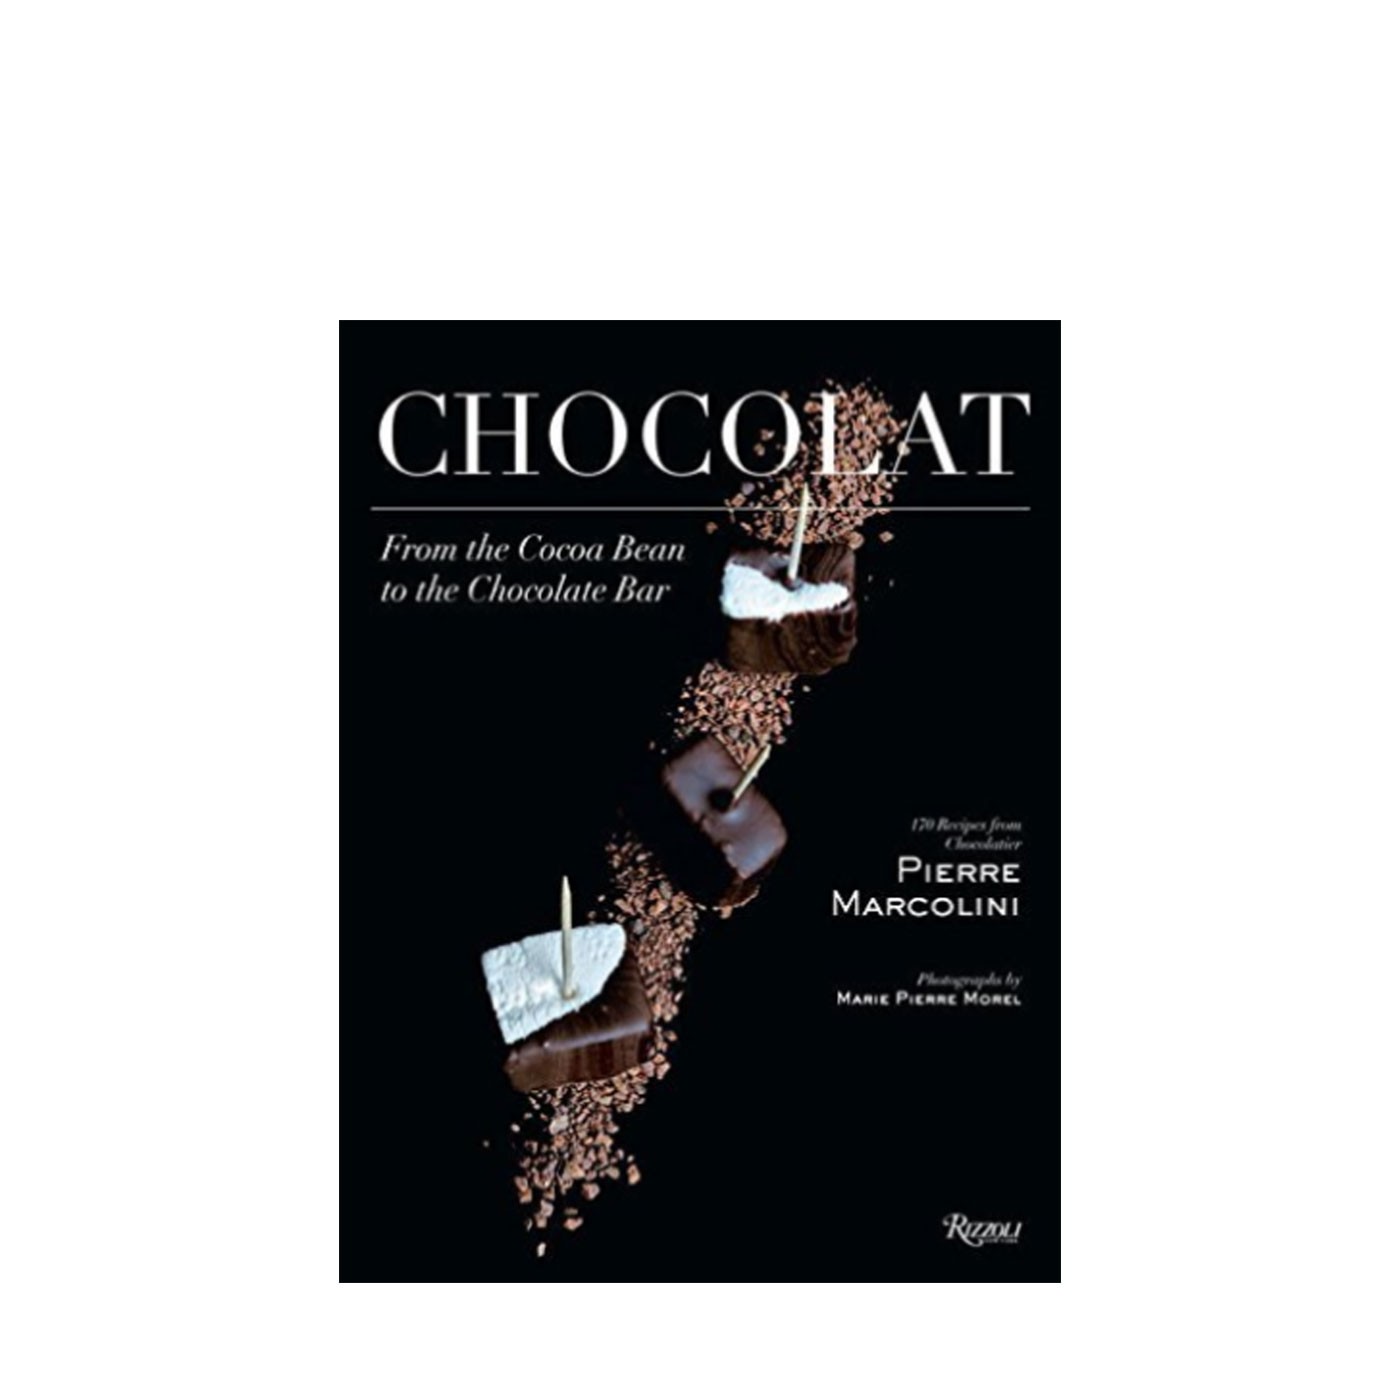 Chocolat From the Cocoa Bean to the Chocolate Bar Eataly